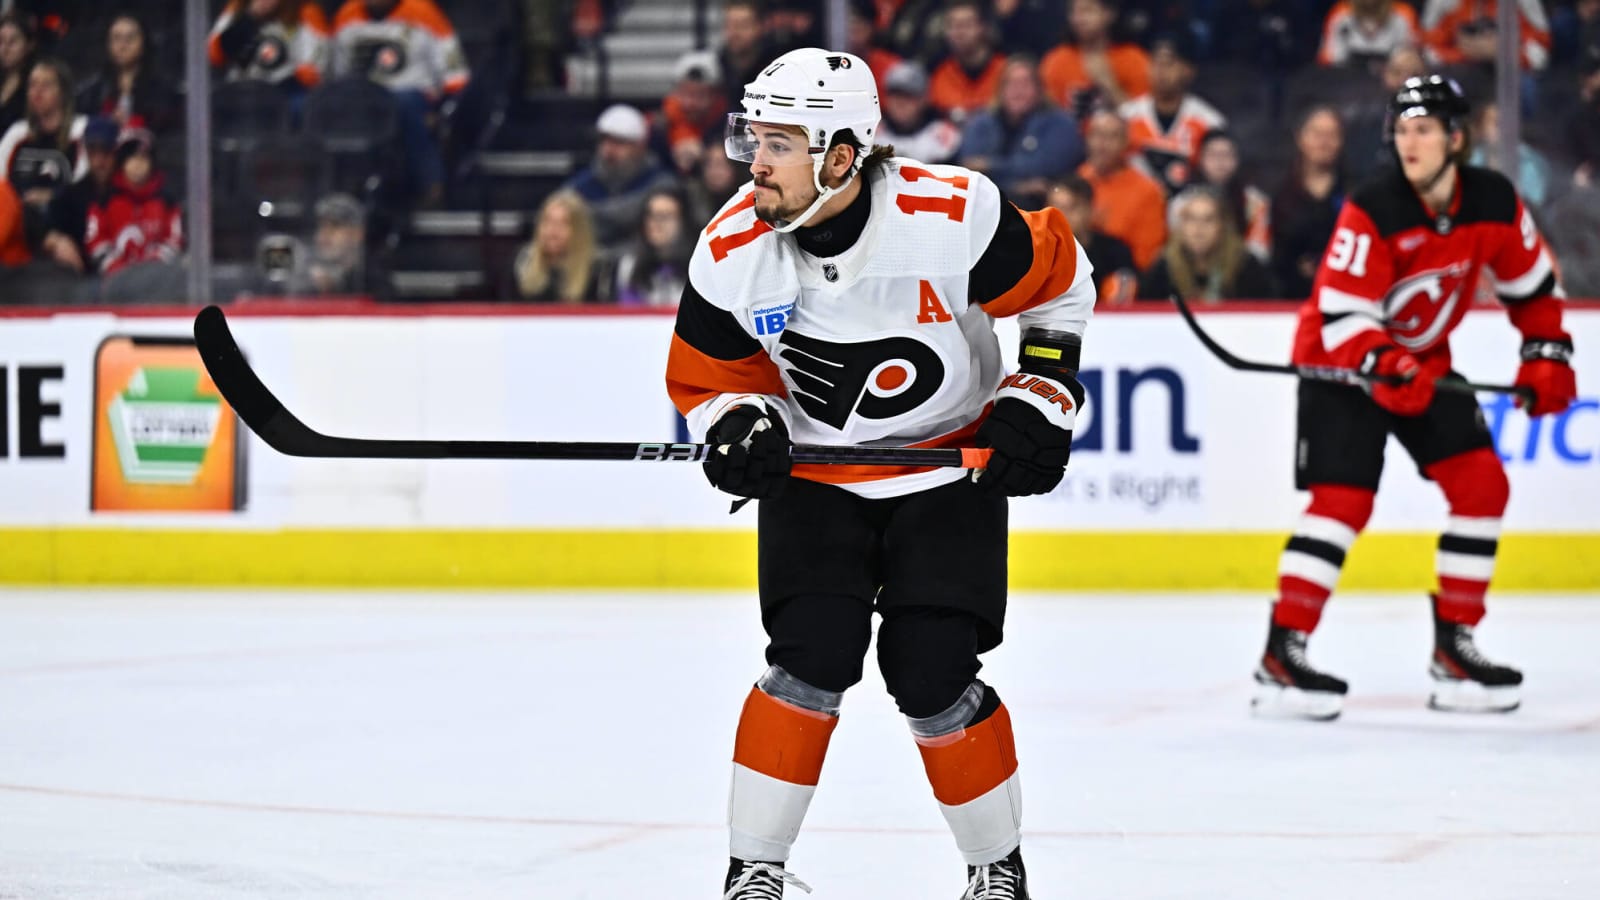 Flyers Star Withdraws from World Championships Consideration